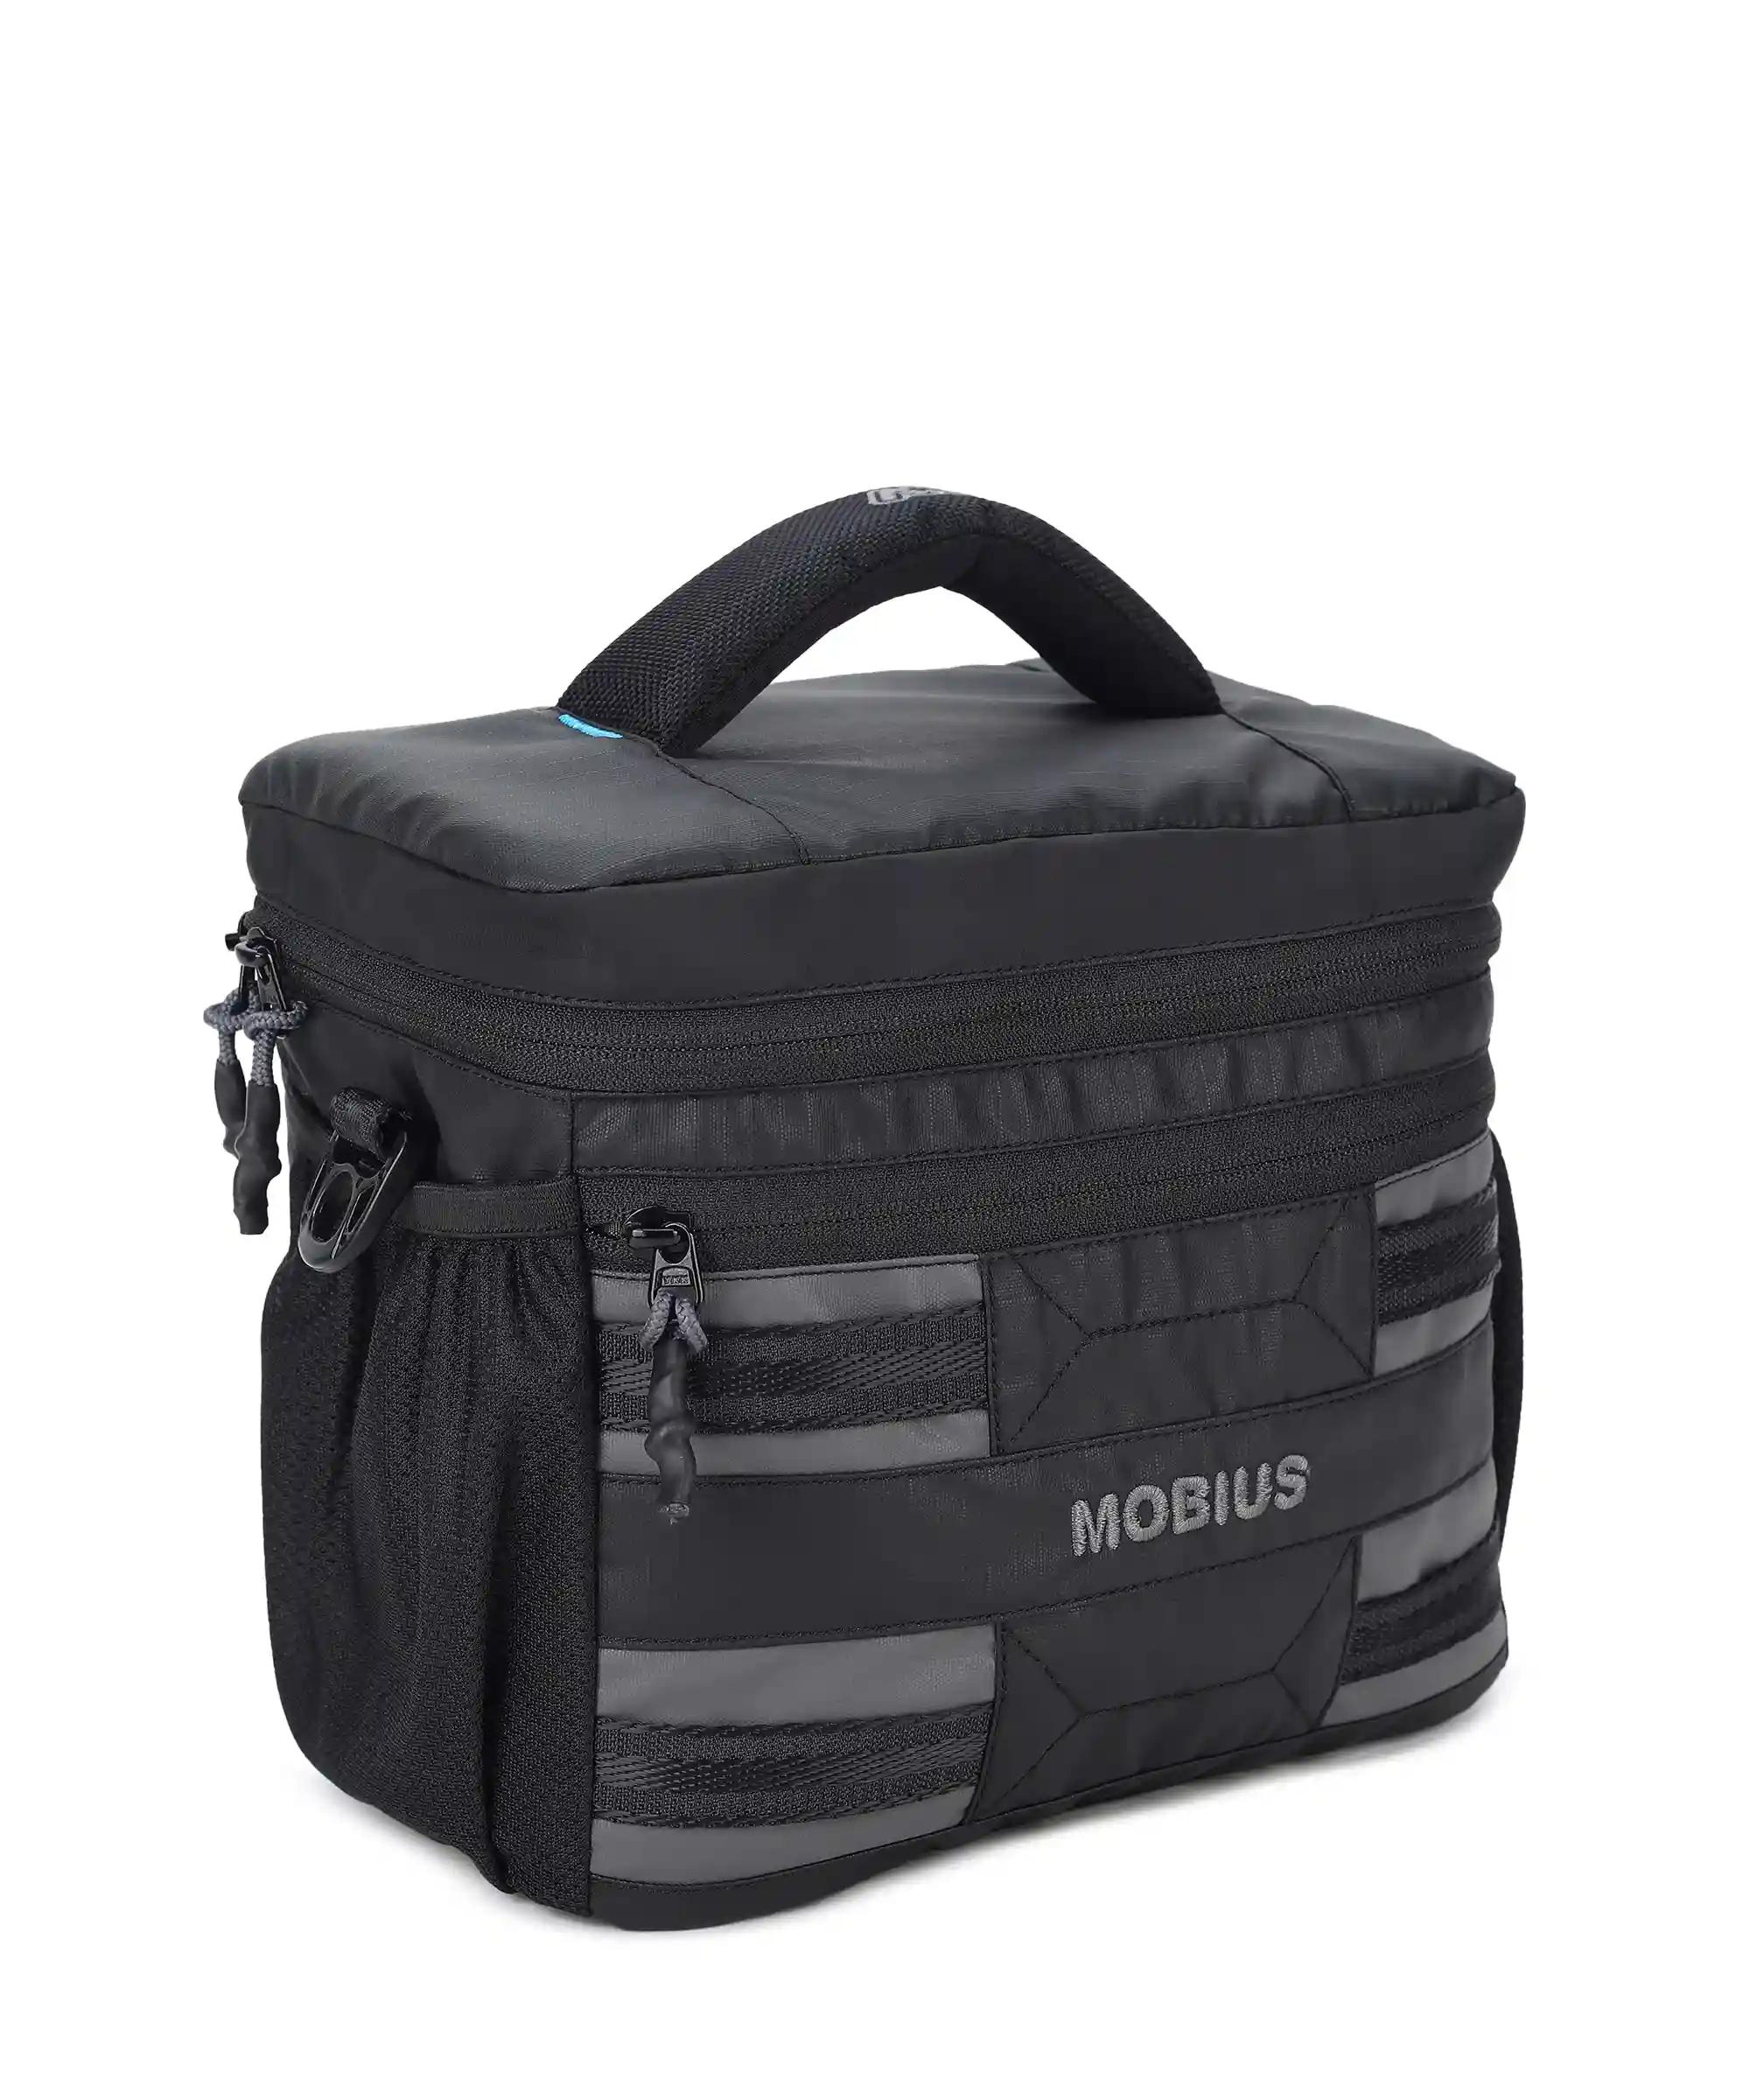 Mobius Protector S 100% Waterproof With Raincover DSLR Sling Bag